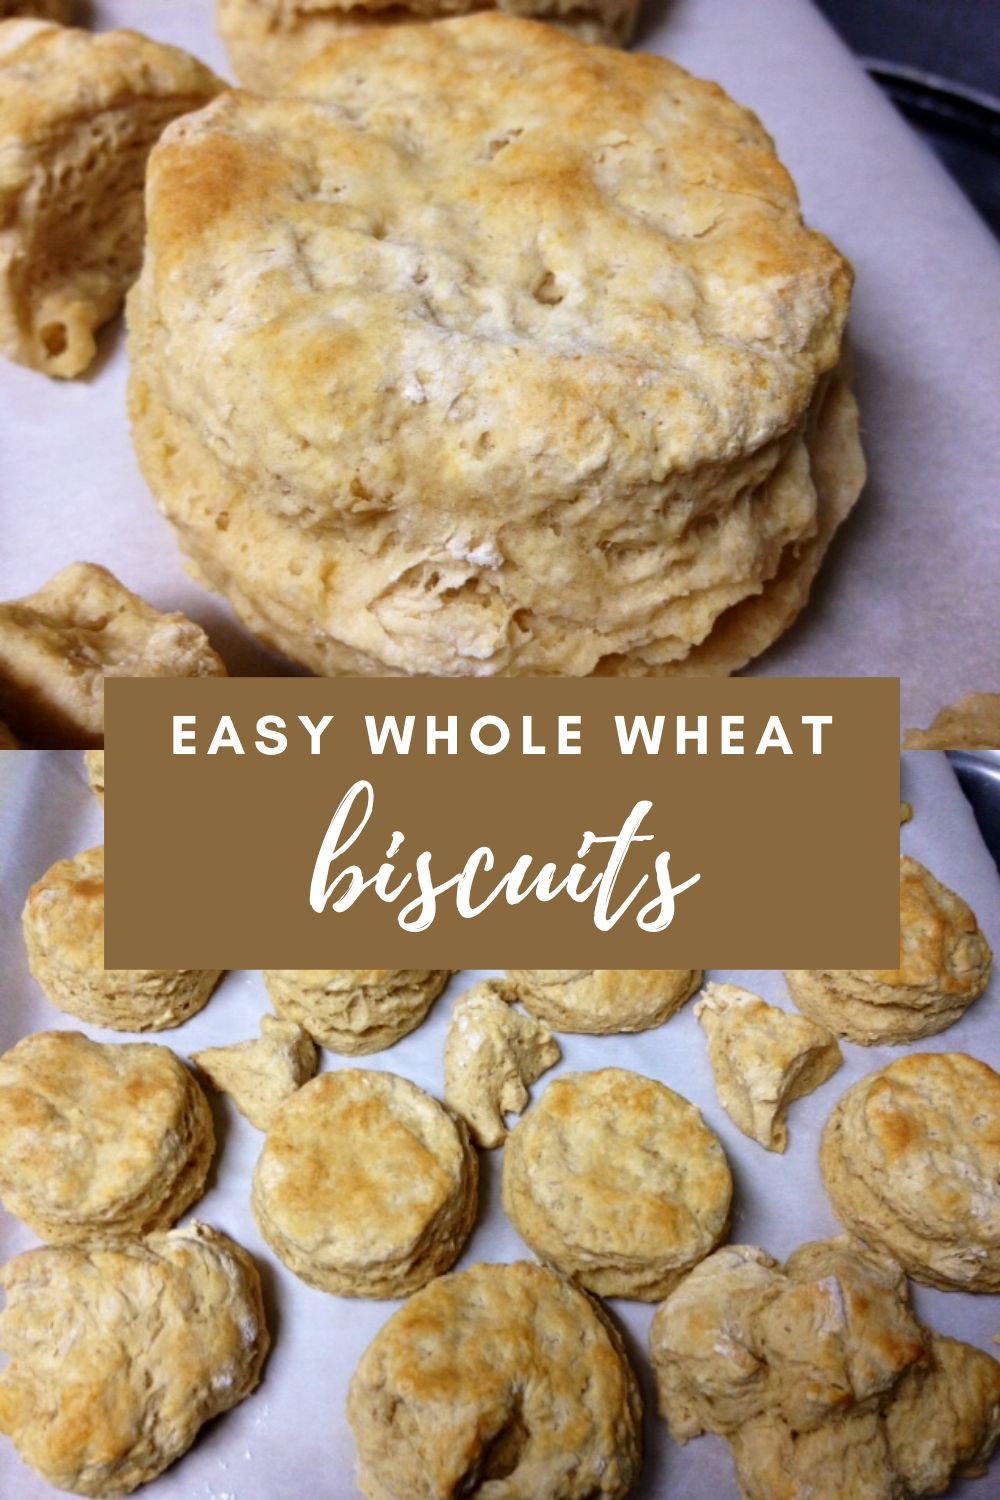 Easy Whole Wheat Biscuits | These biscuits are fluffy, delicious, and easy to make, come together in minutes! Perfect for brunch, biscuits and gravy, and so much more. #biscuits #quickbread #wholewheat #brunch